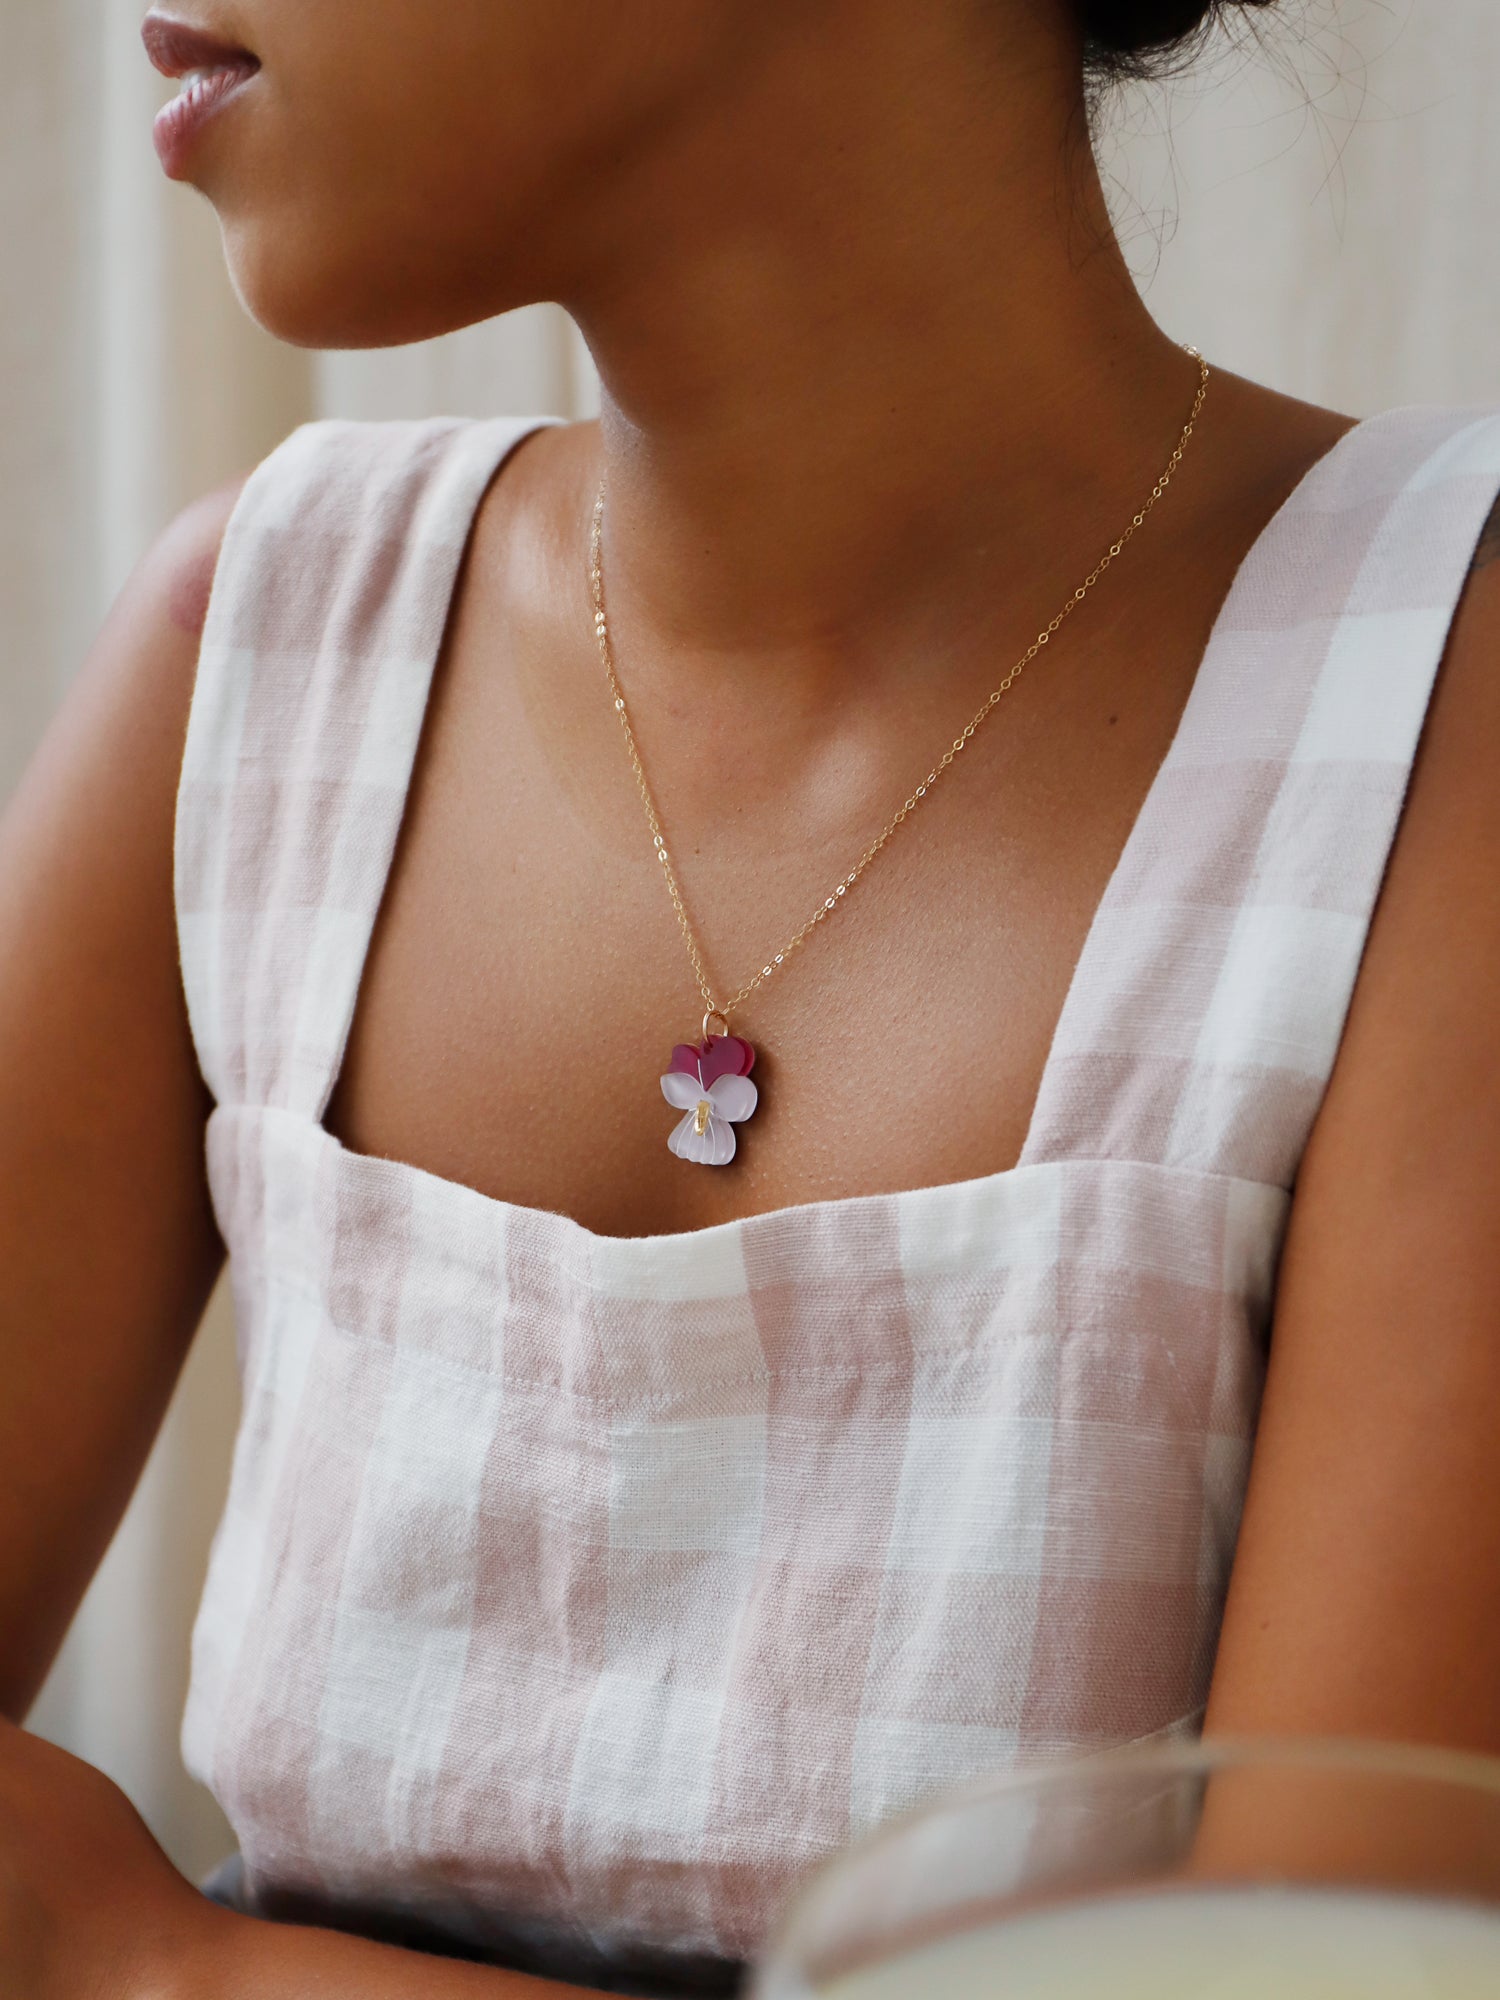 Illustrated violet flower pendant made with wood, 64% recycled acrylic and hand-inked details with 45cm 14k gold-filled chain and findings. Handmade in the UK by Wolf & Moon.